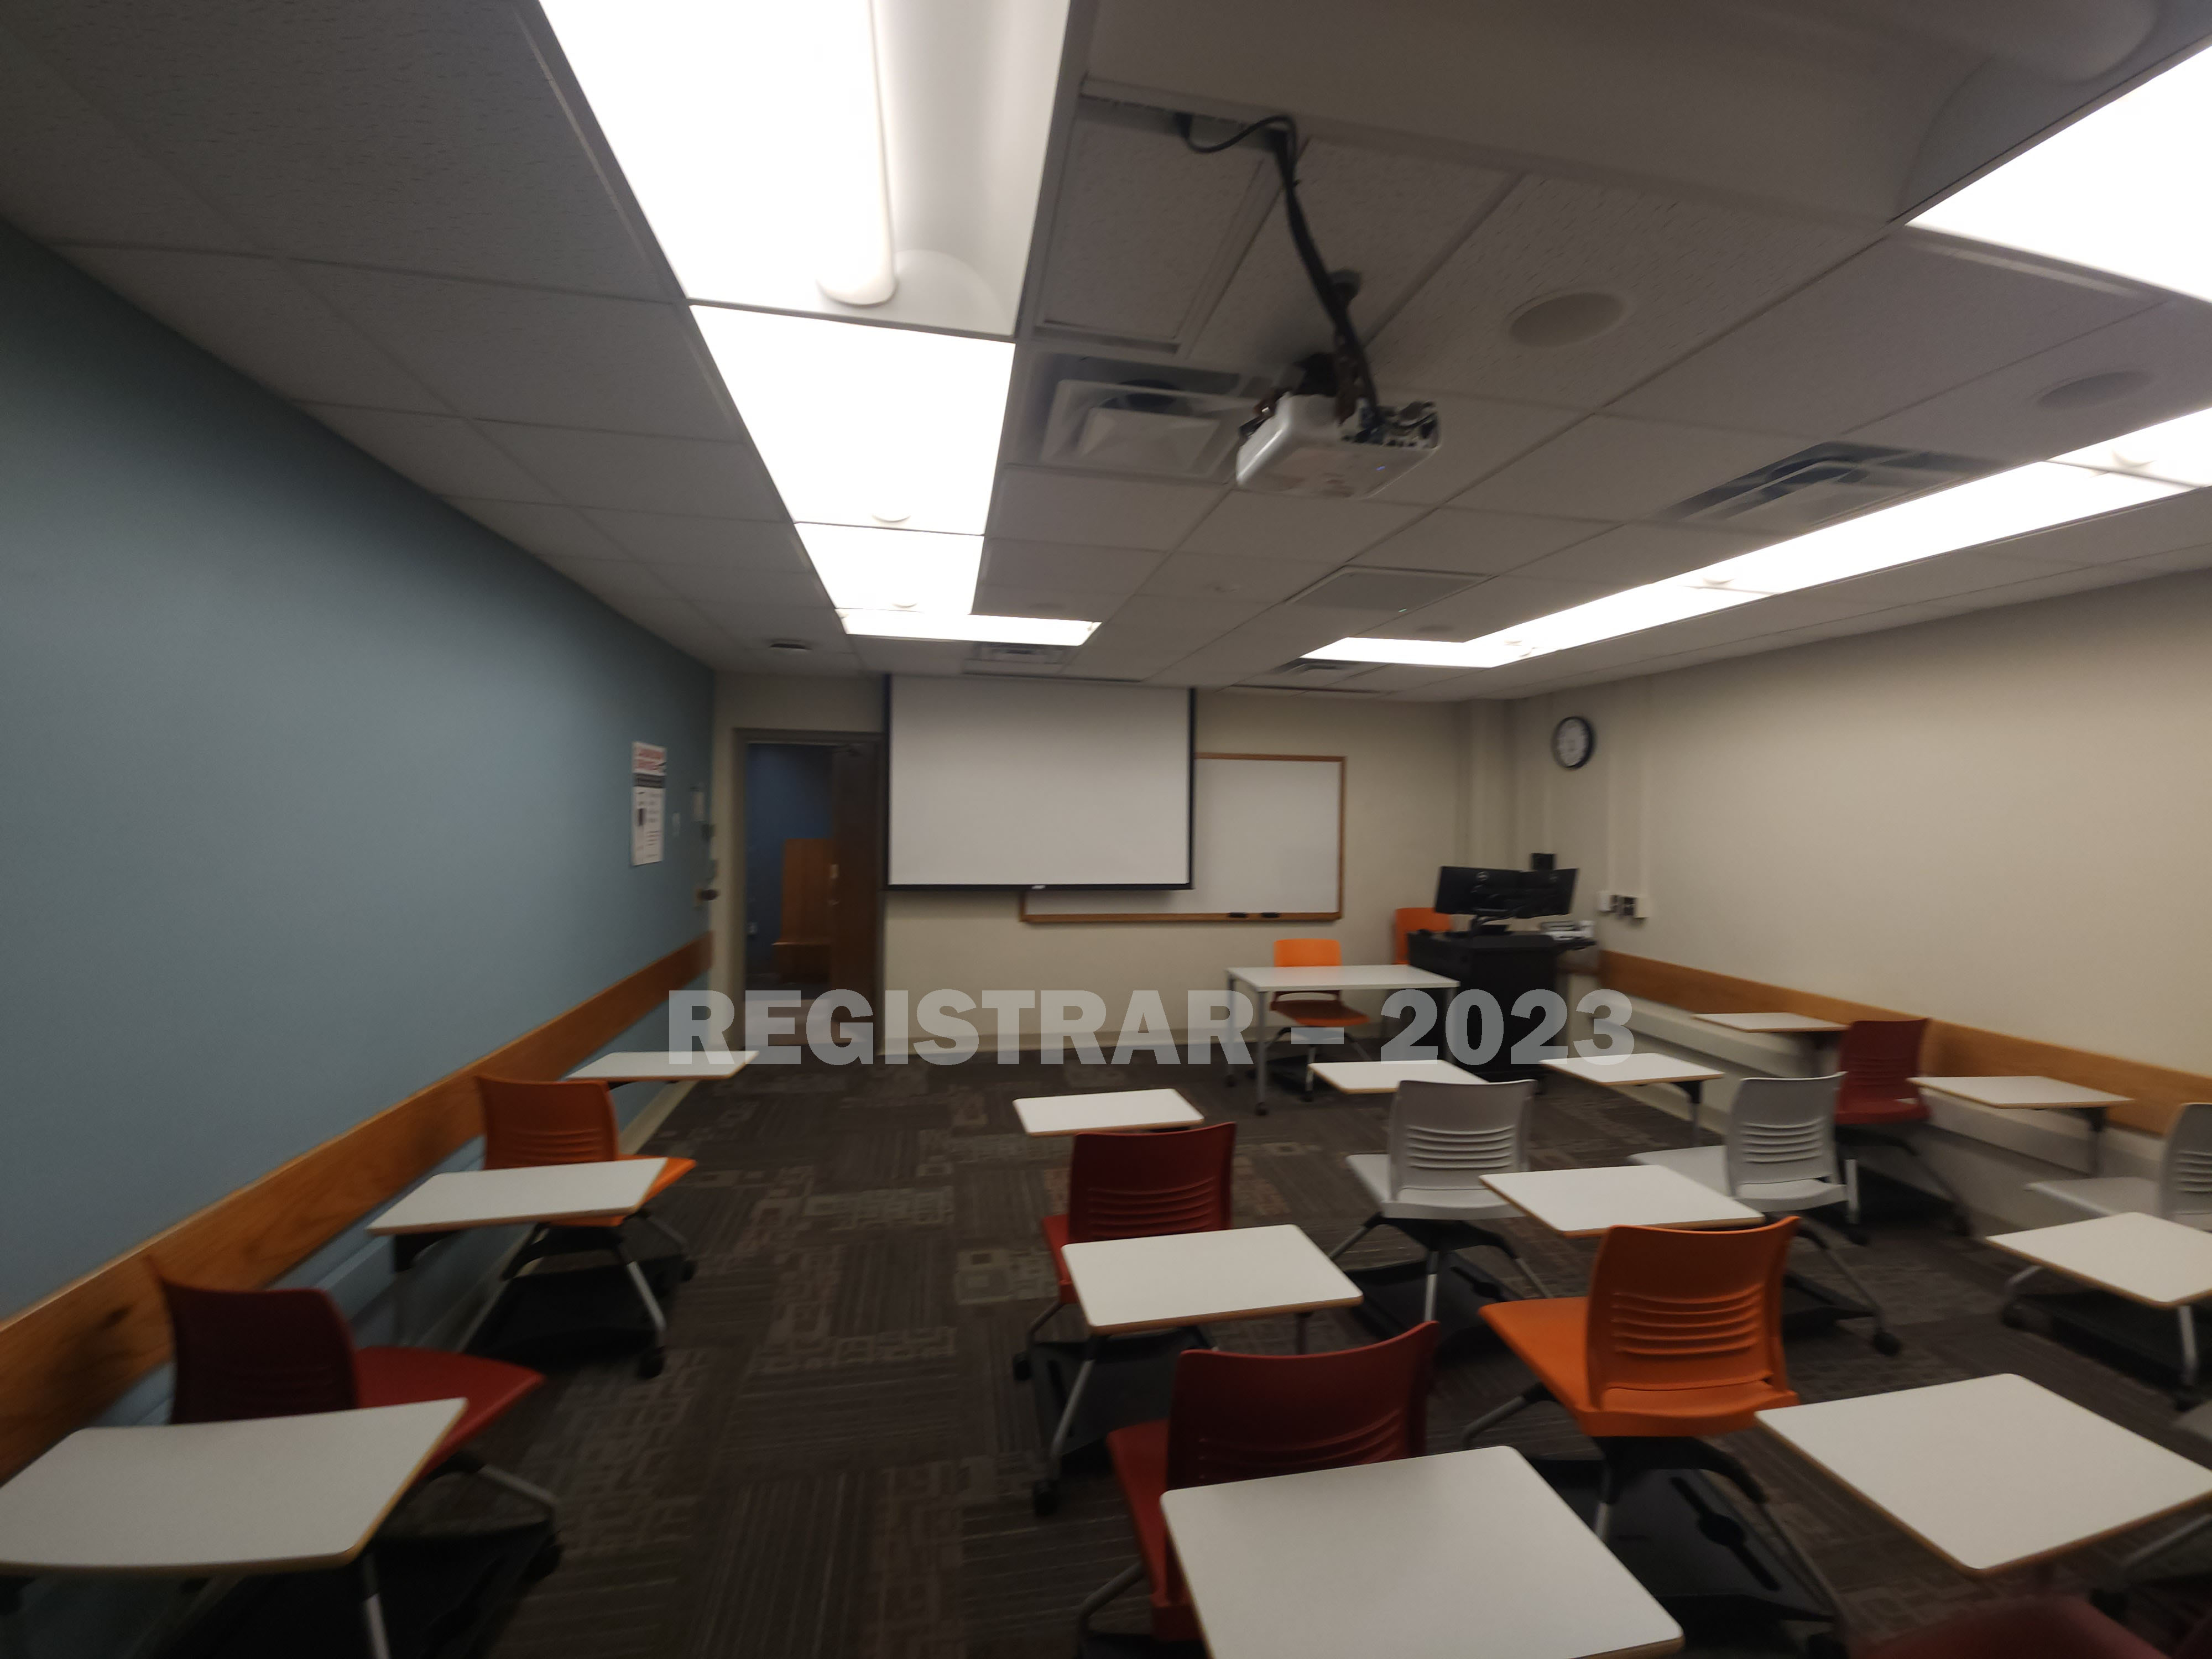 Journalism Building room 291 ultra wide angle view from the back of the room with projector screen down